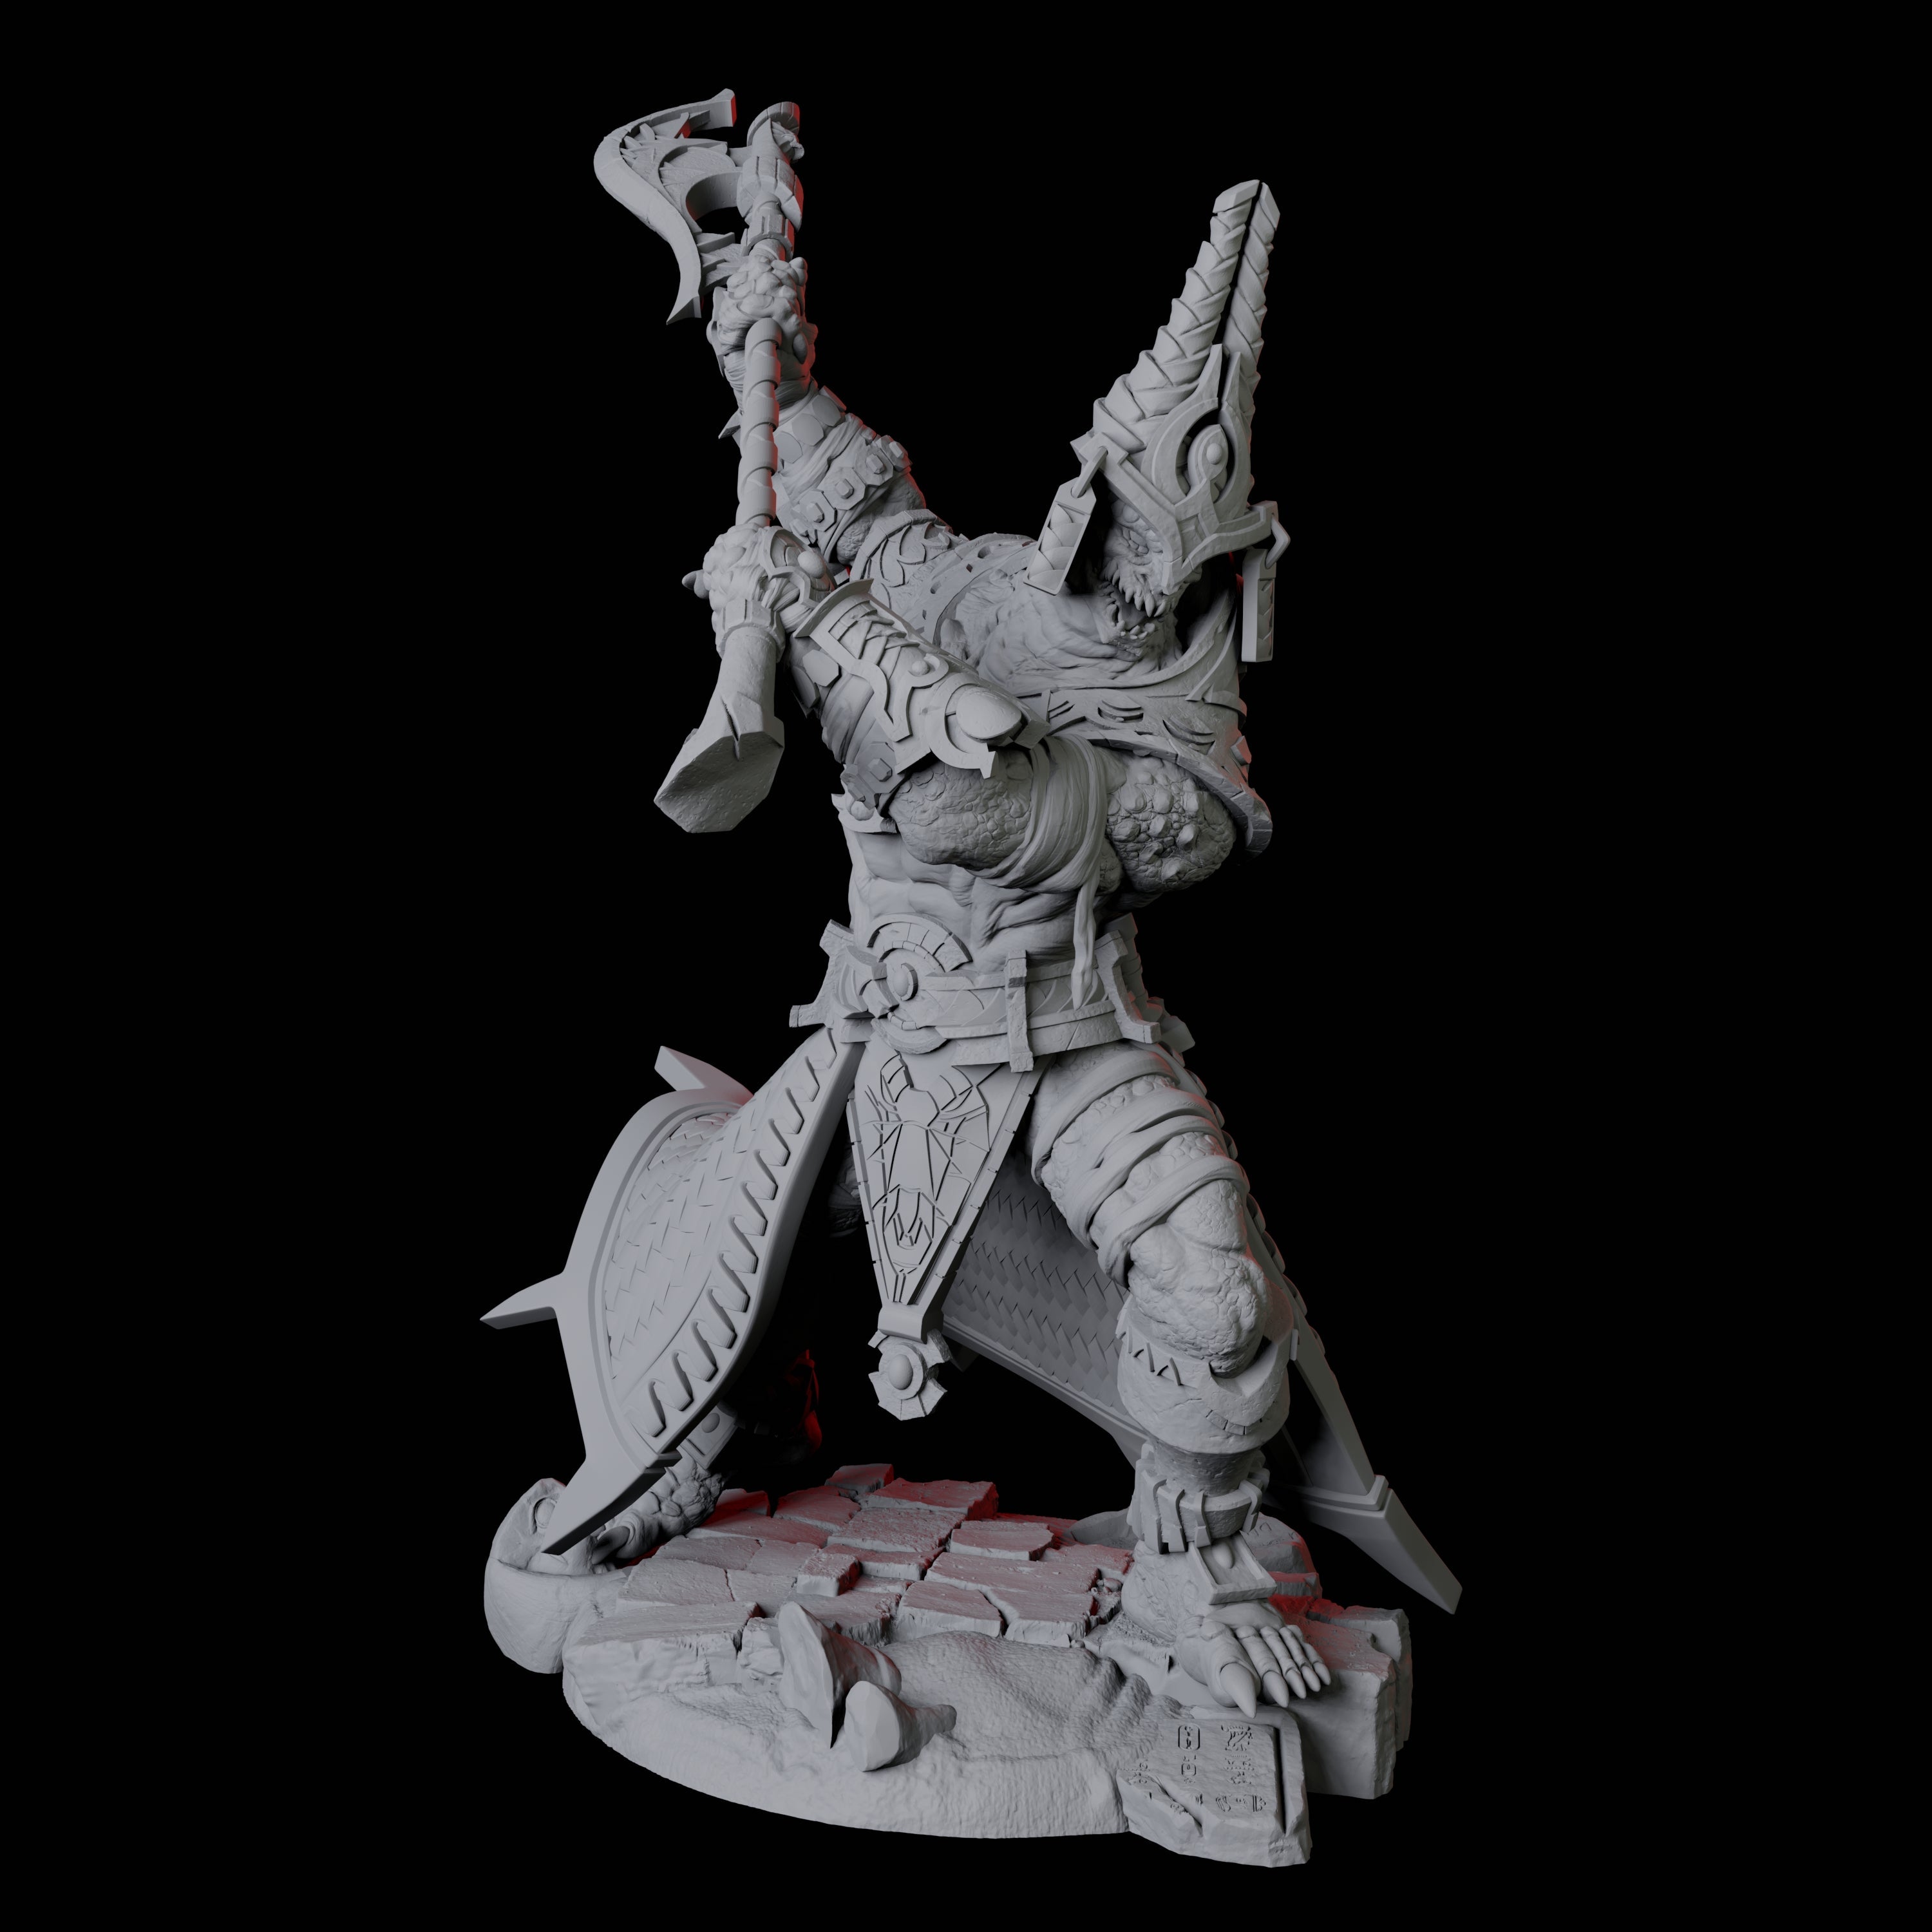 Saurian War Priest B Miniature for Dungeons and Dragons, Pathfinder or other TTRPGs